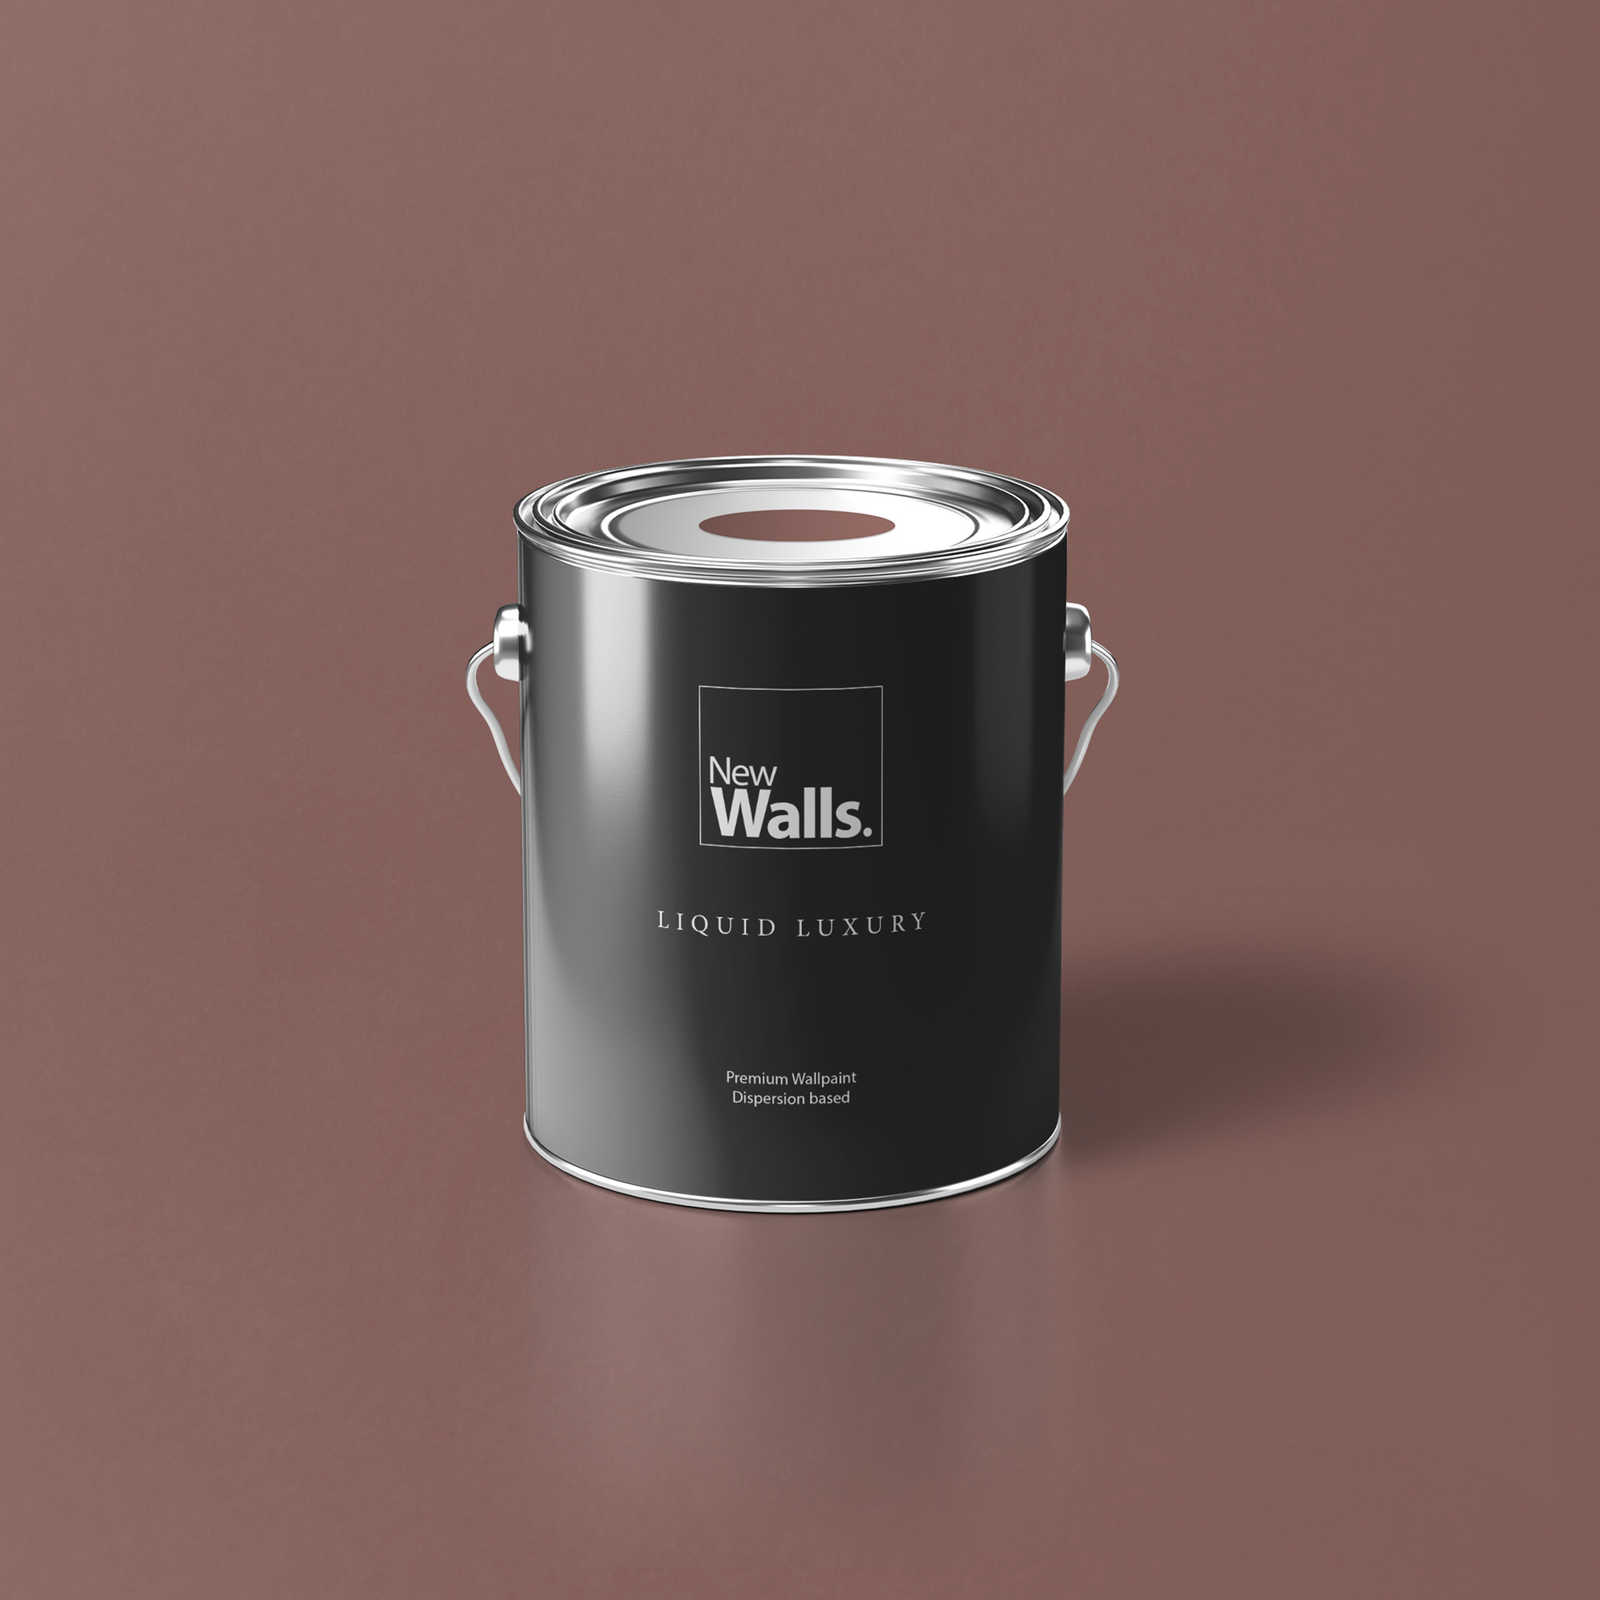 Premium Wall Paint Nature Dark Pink »Natural Nude« NW1012 – 2.5 litre
